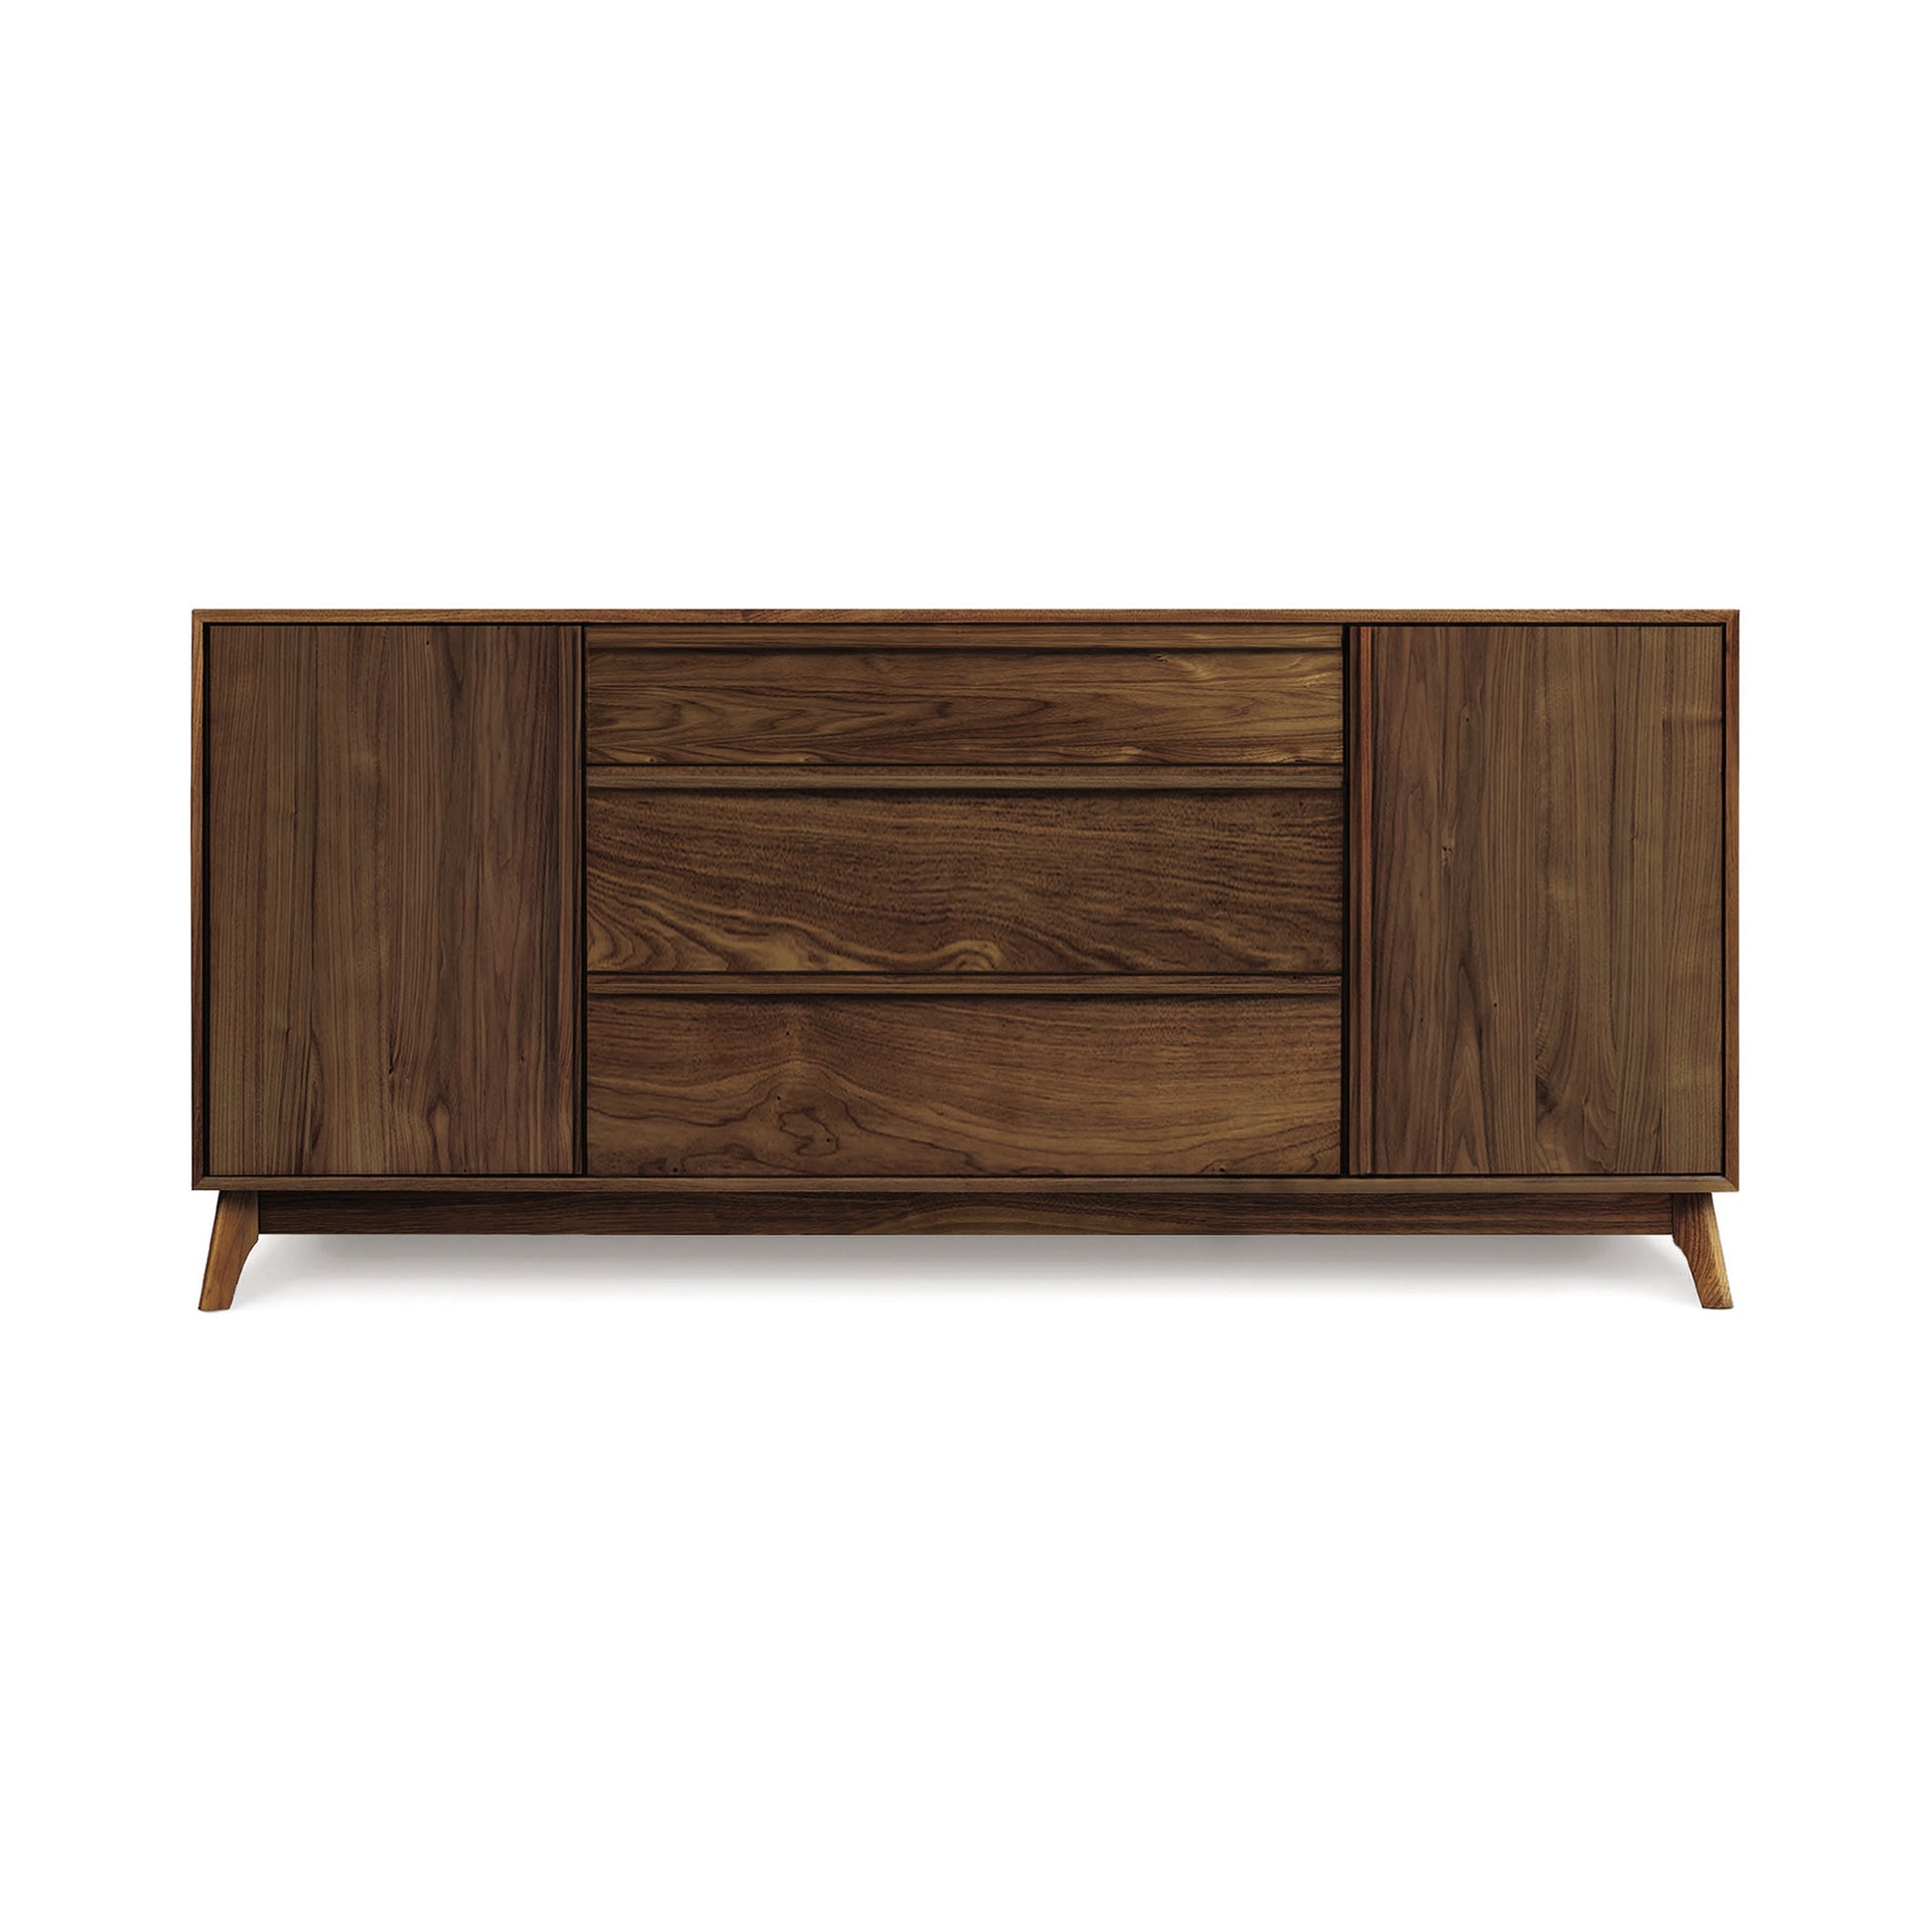 A Catalina 3-Drawers, 2-Door Buffet from the luxury dining furniture collection, Copeland Furniture, with a simple, mid-century modern design featuring two doors and three drawers, set against a white background.